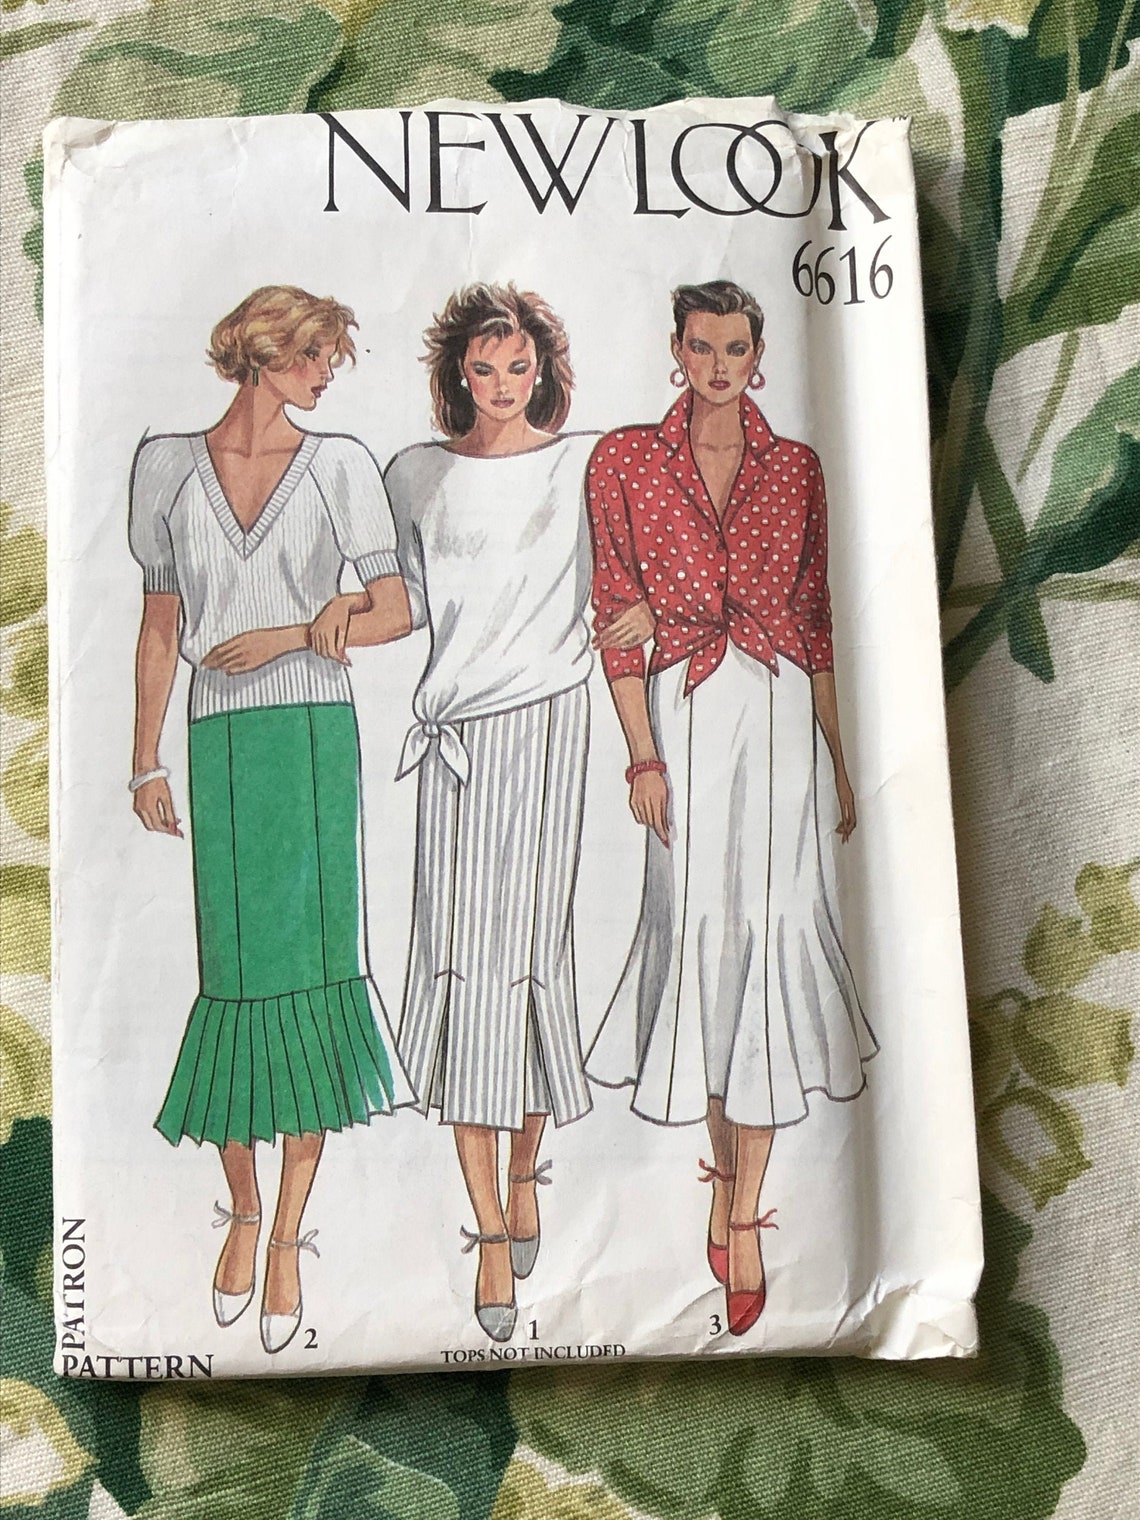 Vintage 1990s New Look PATTERN 6616 Women's Skirts 3 - Etsy